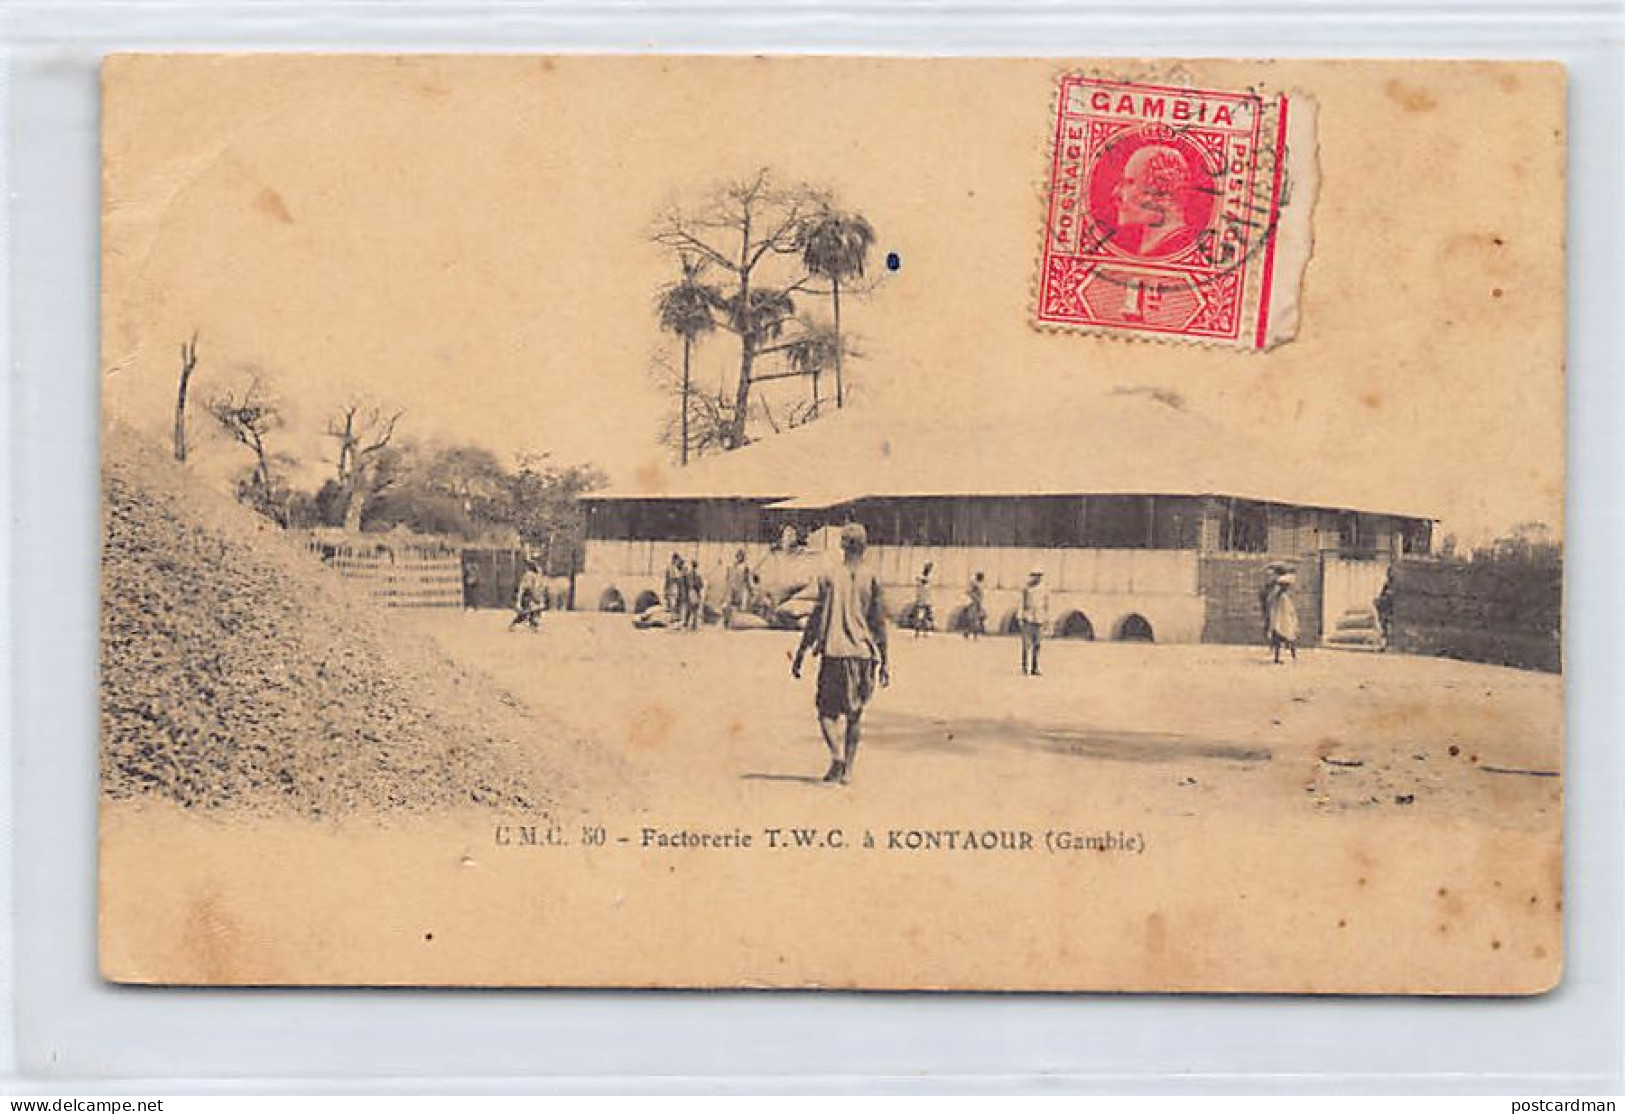 Gambia - KONTAOUR - T.W.C. Trading Post - Publ. C.M.C. 50 - Gambie